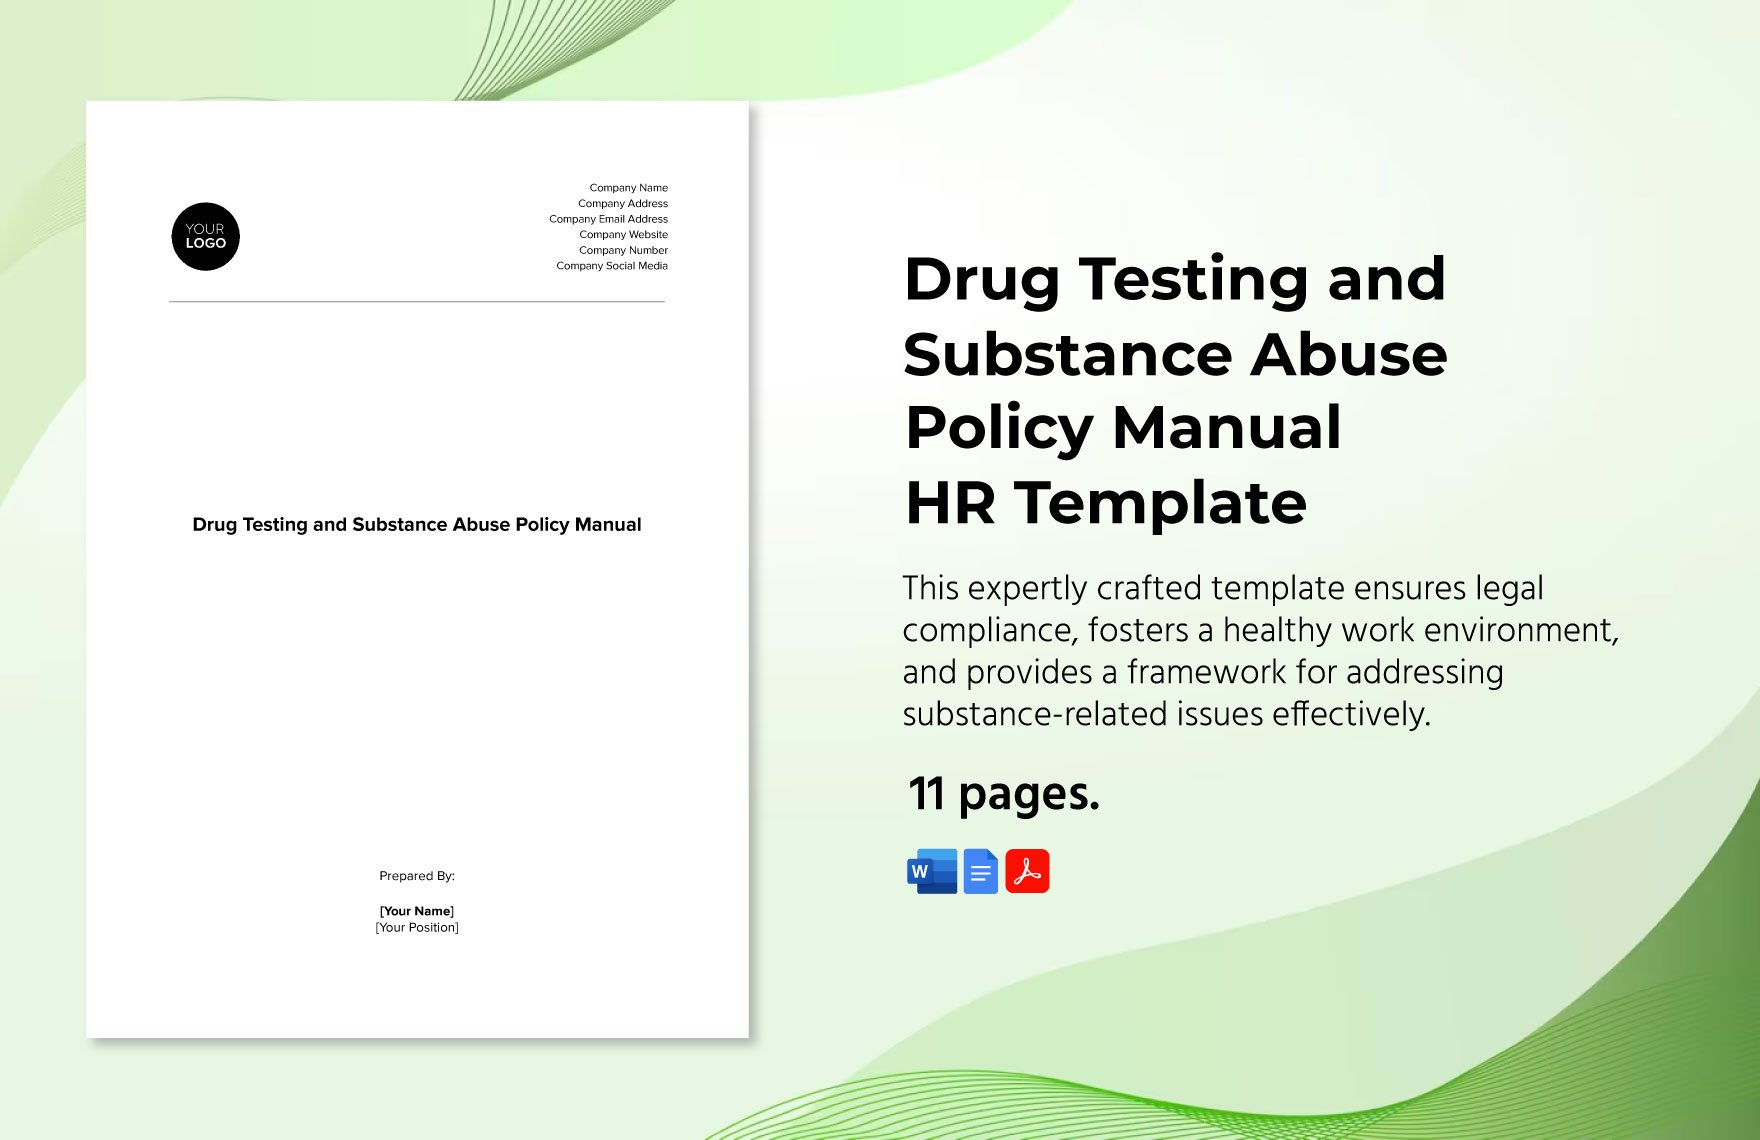 Drug Testing and Substance Abuse Policy Manual HR Template